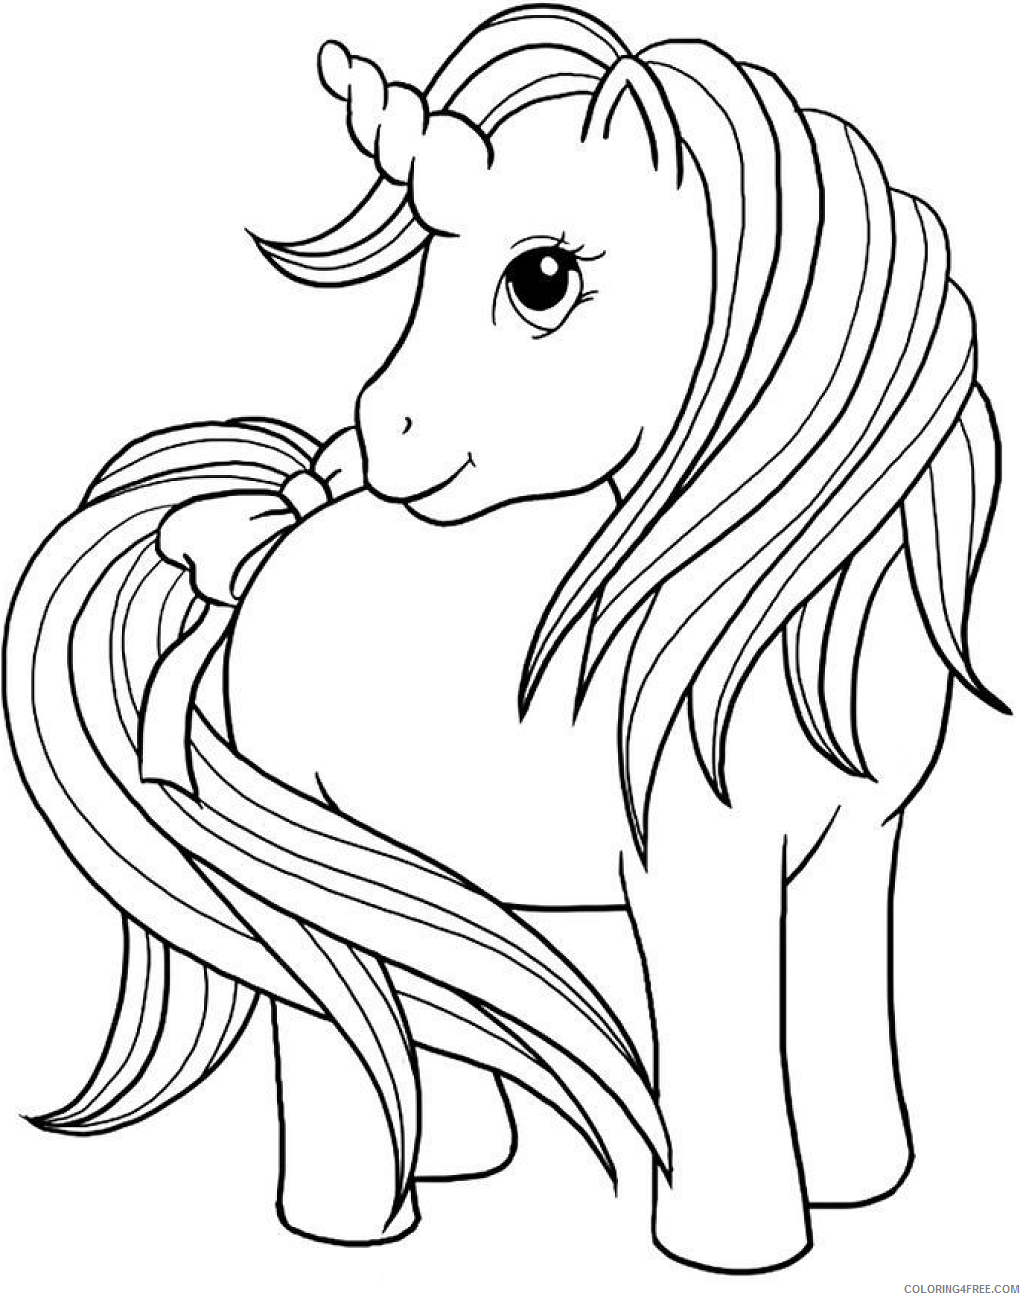 Bows Coloring Pages unicorn_with_bow_at_tail Printable 2021 1092 Coloring4free